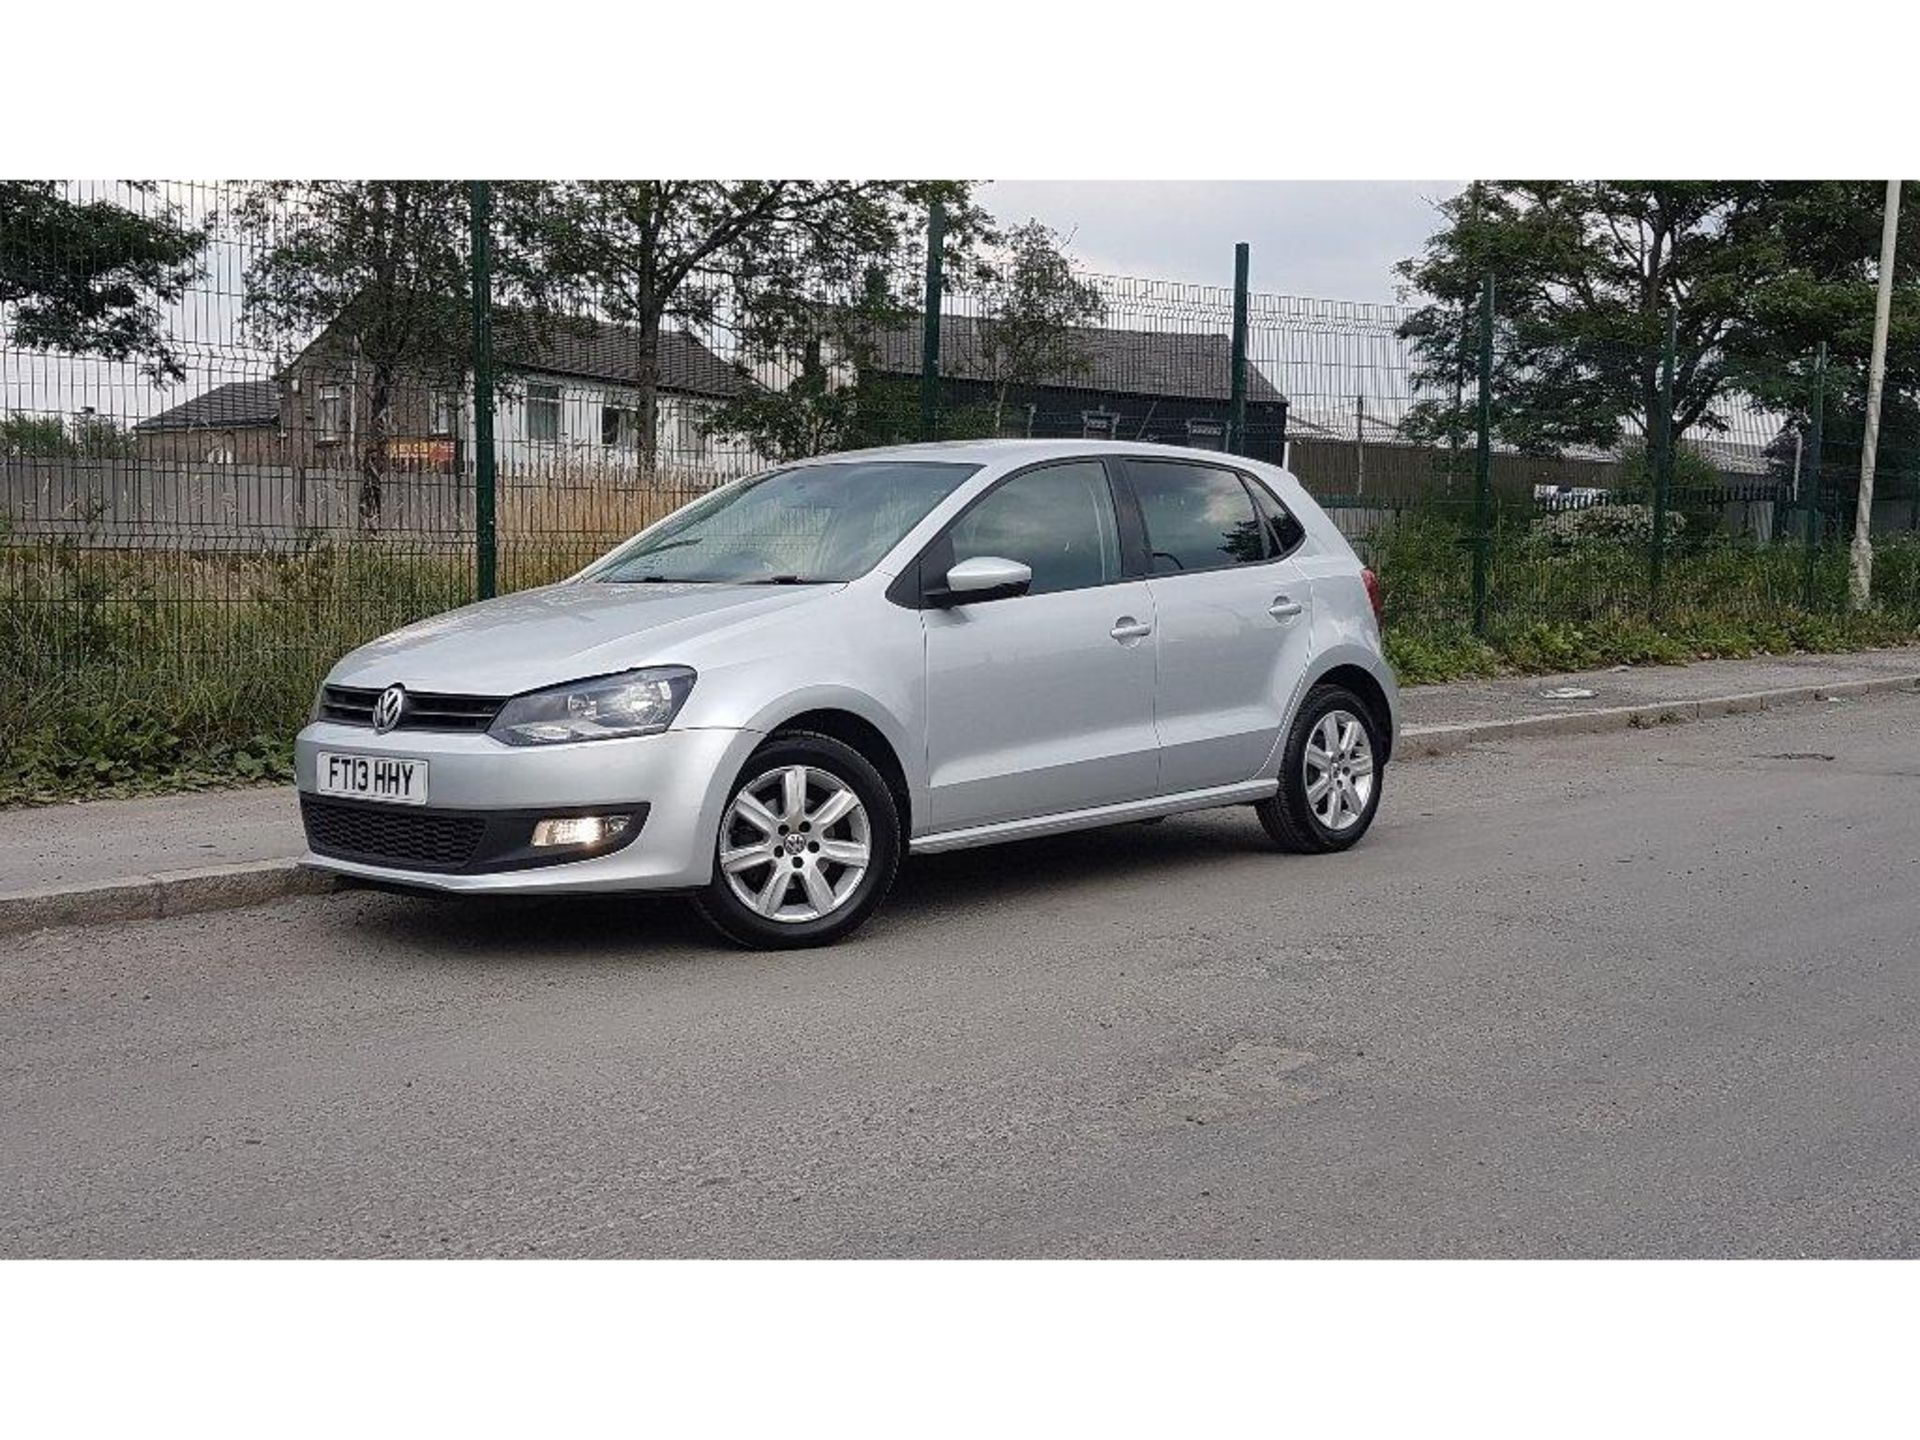 VOLKSWAGEN POLO 1.2 MATCH EDITION 5DR, FT13 HHY, 20.05.2013, PETROL, MILEAGE 28,499, MANUAL, 1.2L, 2 - Image 16 of 19